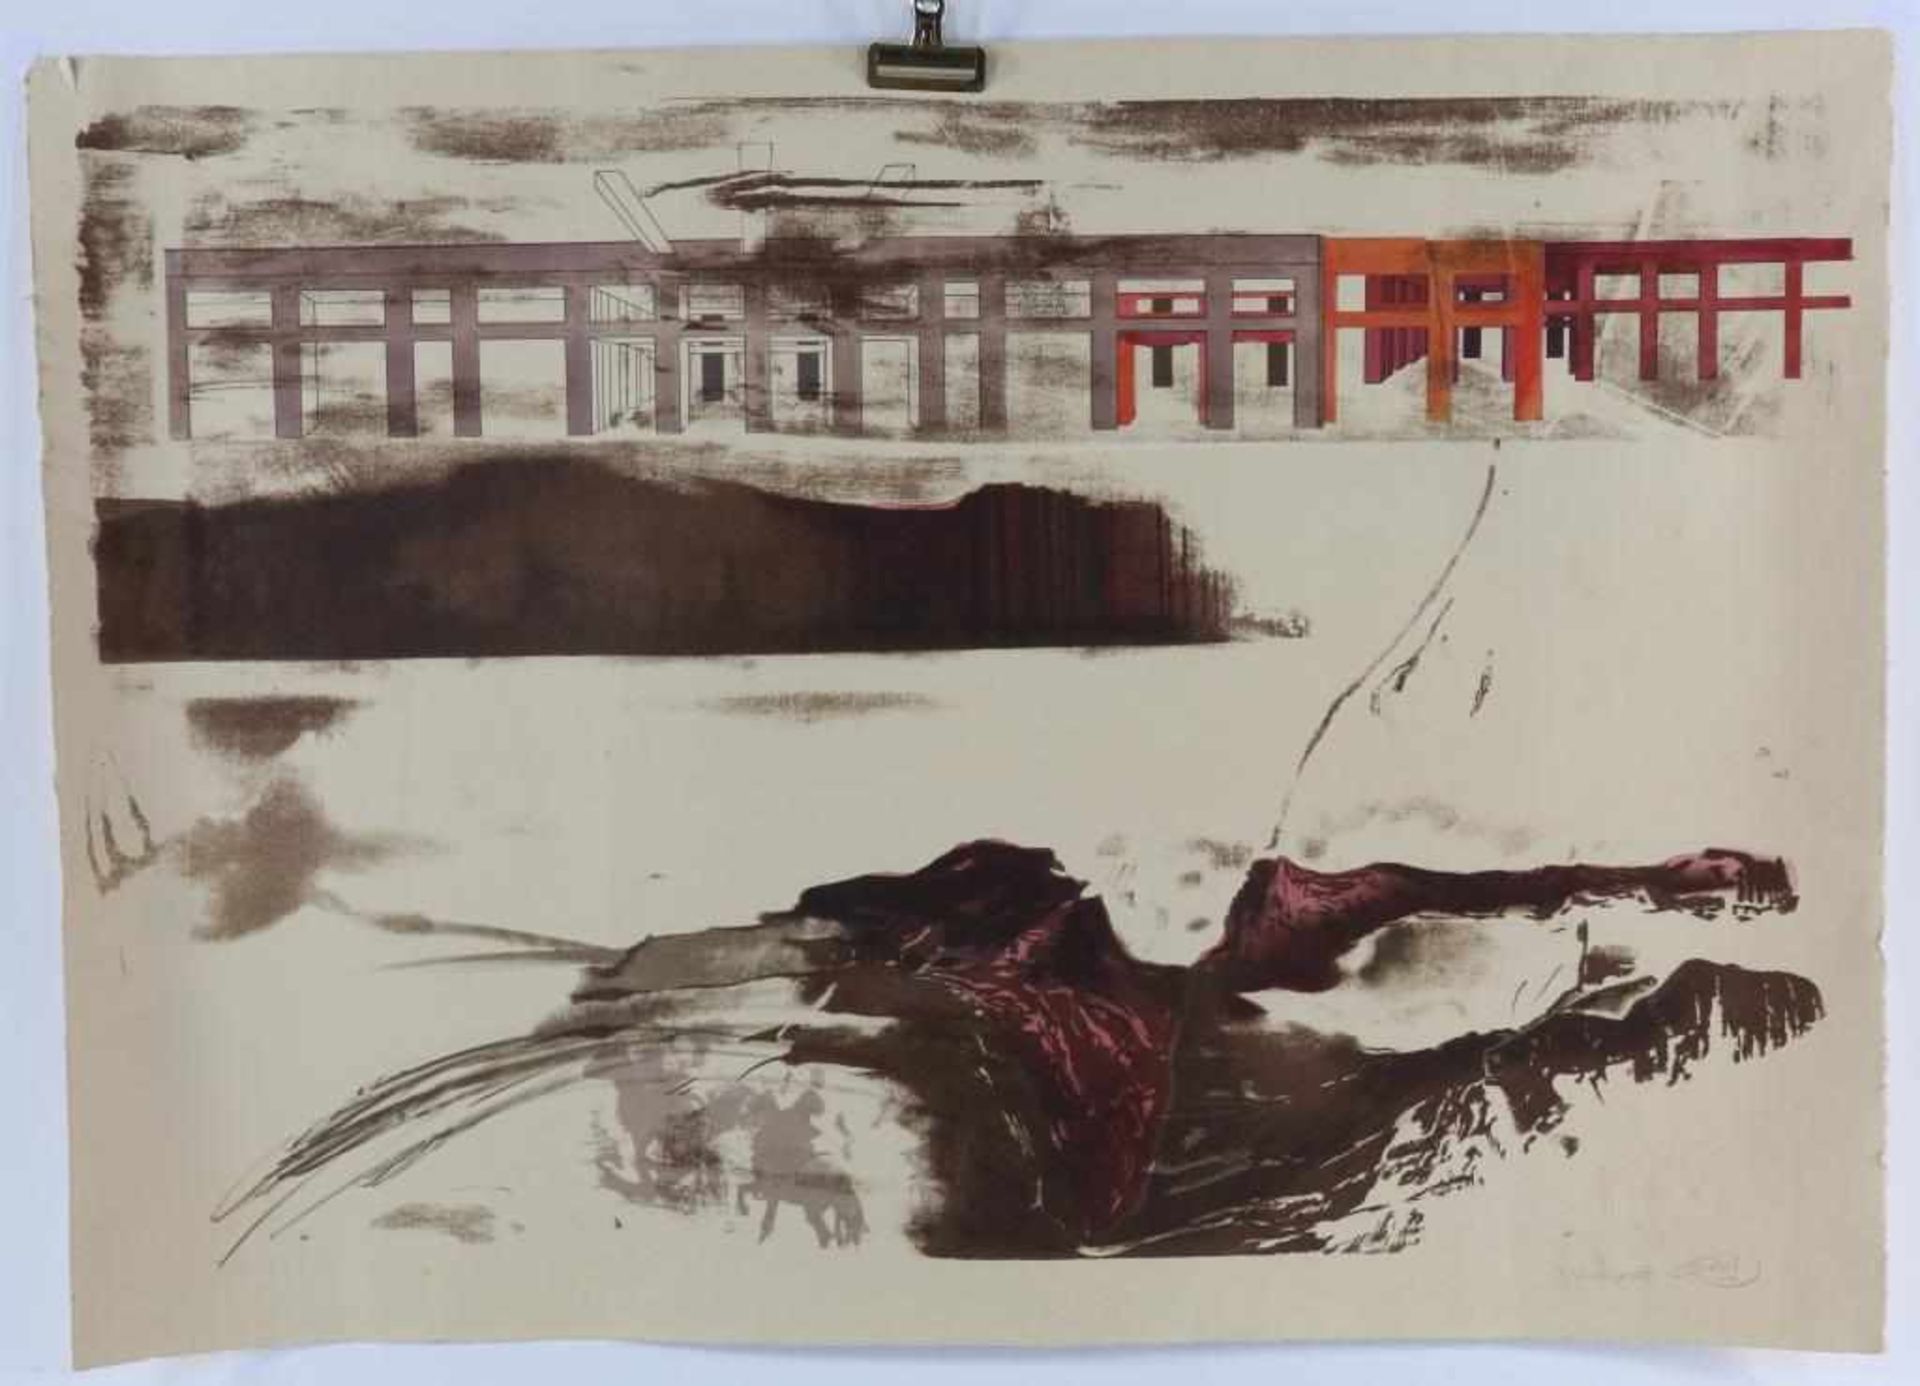 BIERENBROODSPOT, GERTI (BORN 1940), signed and dated 1975 l.r., composition, color lithograph 75 x